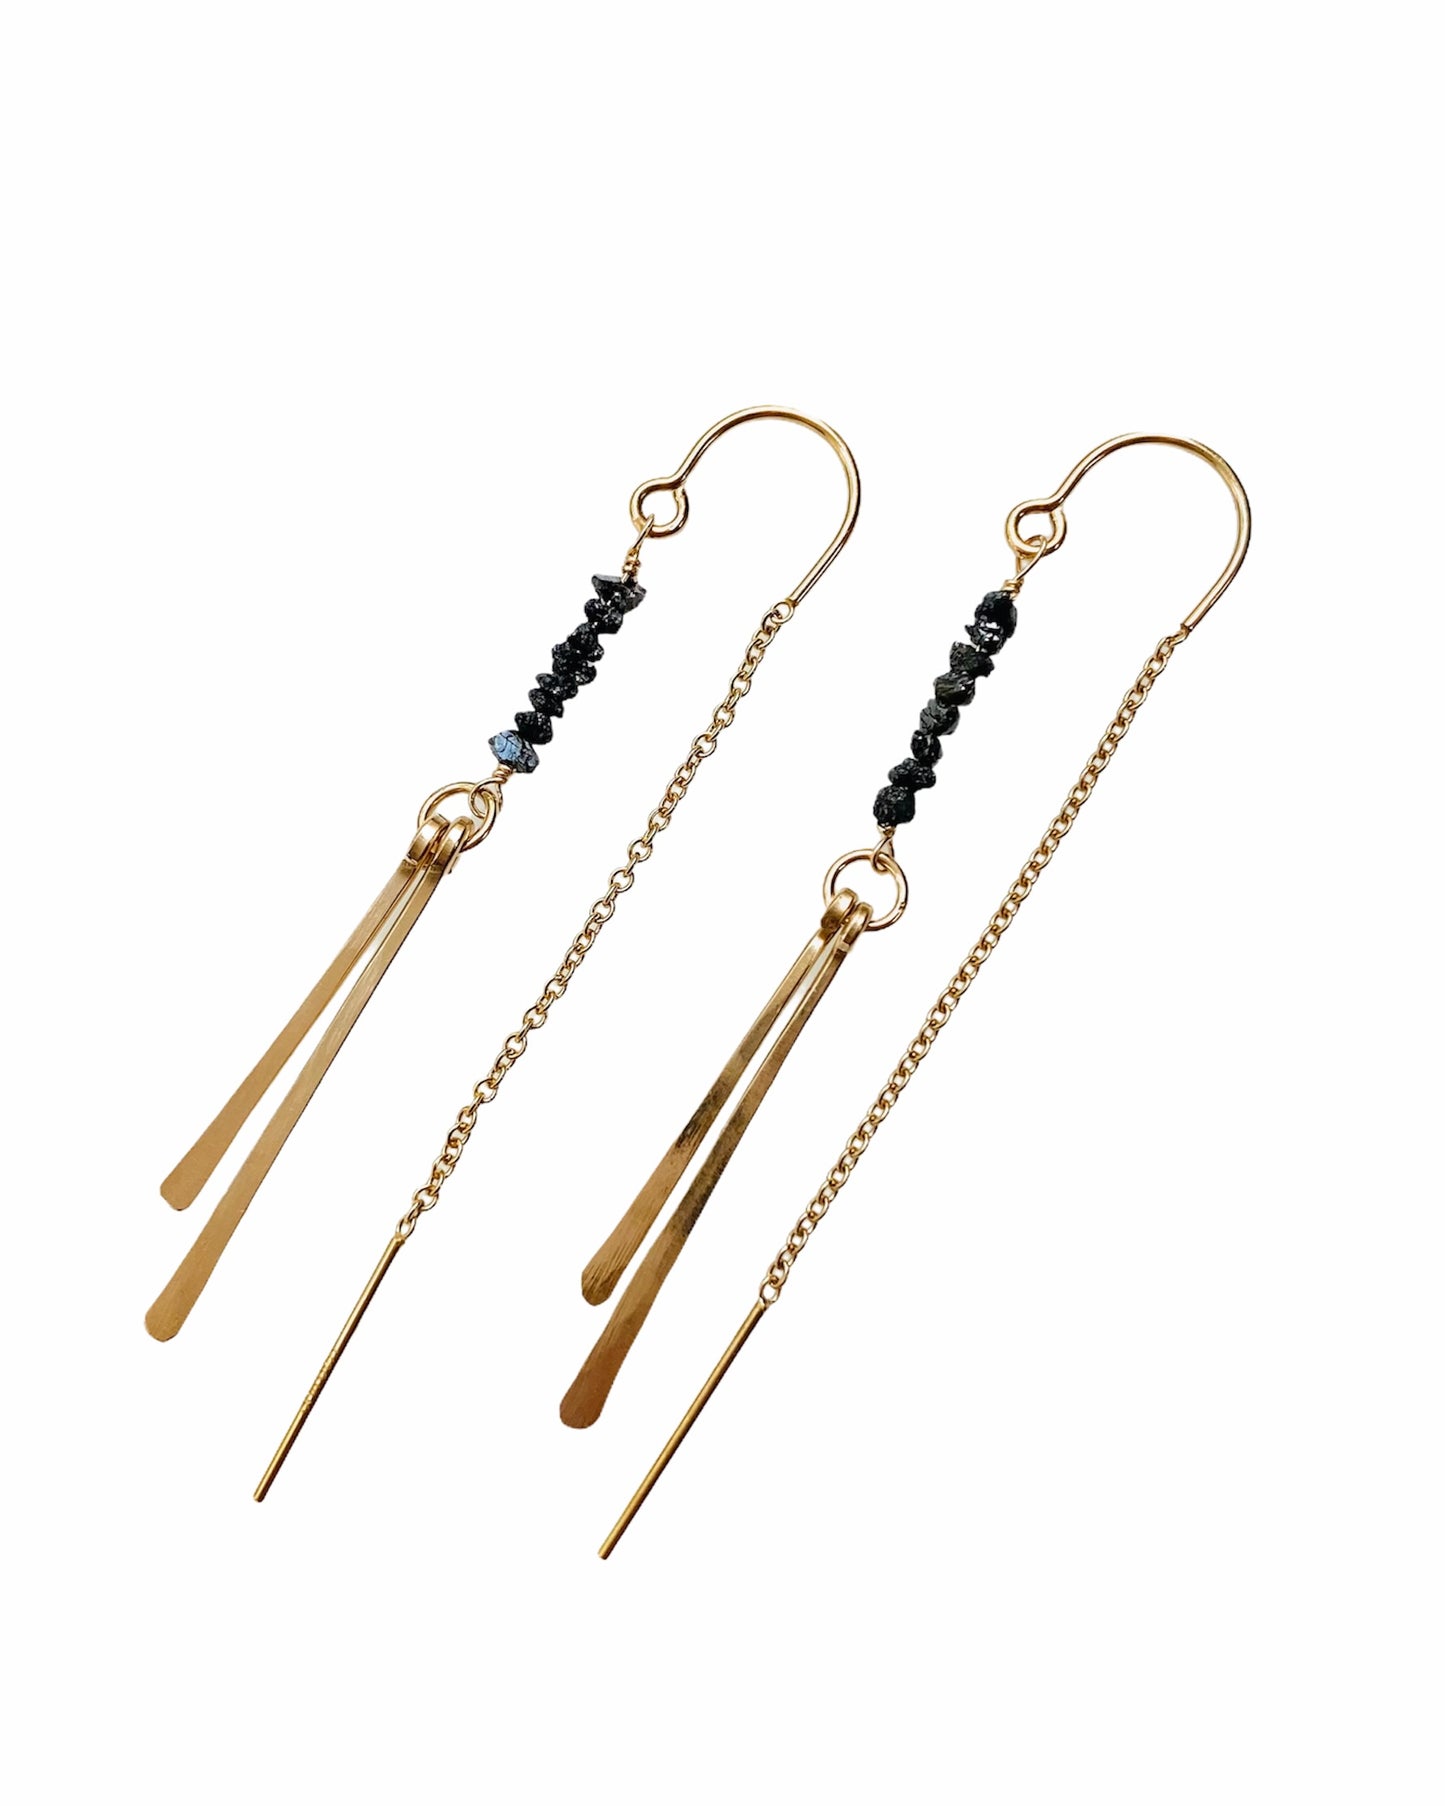 Handmade threader earrings featuring raw black diamonds and hammered gold bars. Measure approximately 2 3/4" long